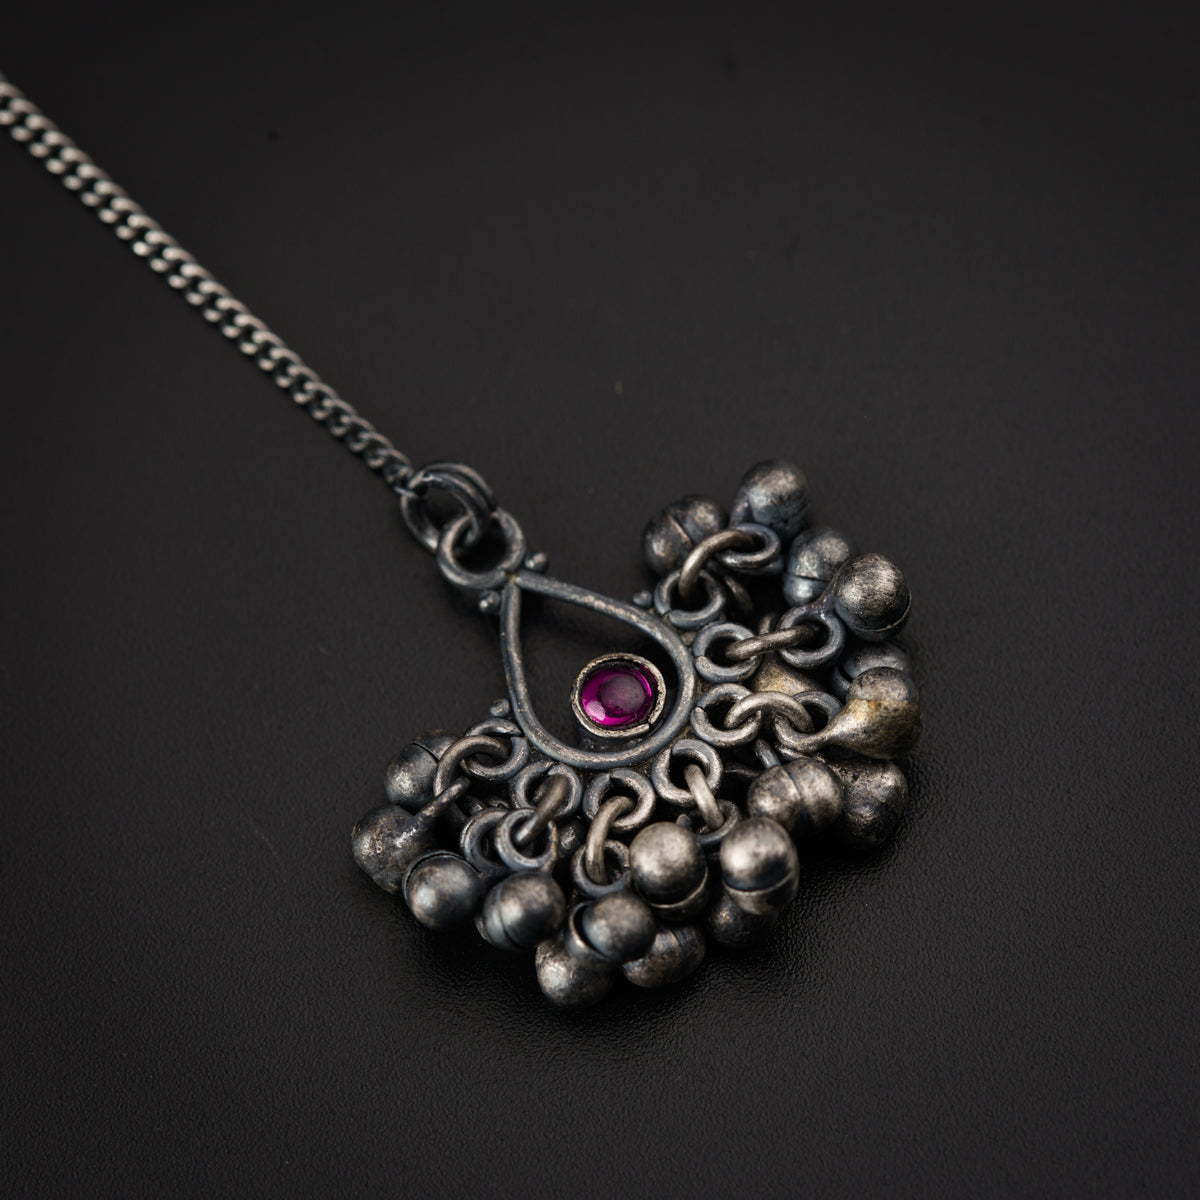 a silver necklace with a red stone in the center